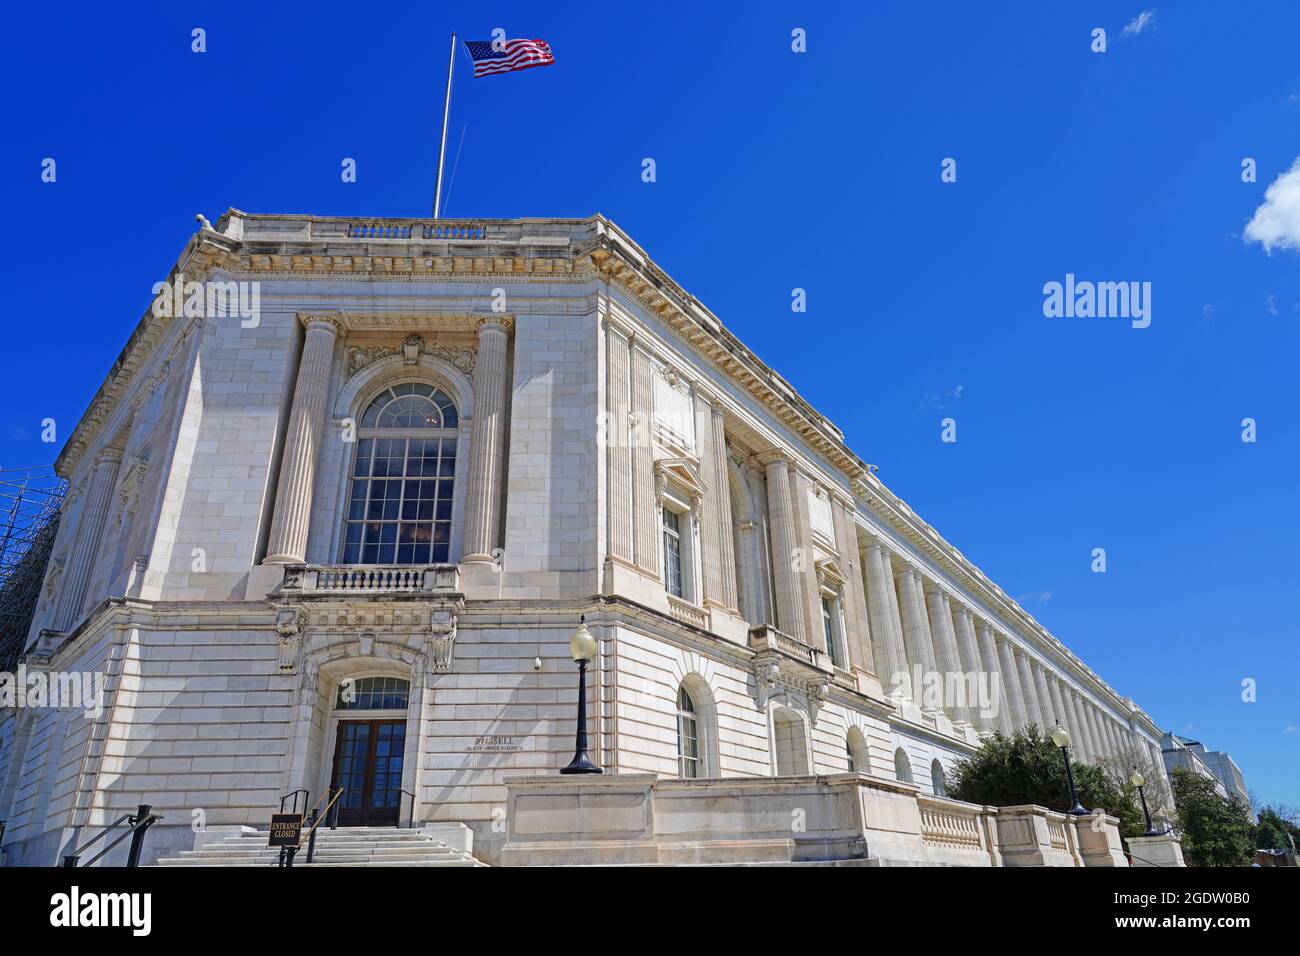 WASHINGTON, DC -2 APR 2021- View of the Russell Senate Office Building at the United States Congress, seat of the legislative branch of the U.S. feder Stock Photo